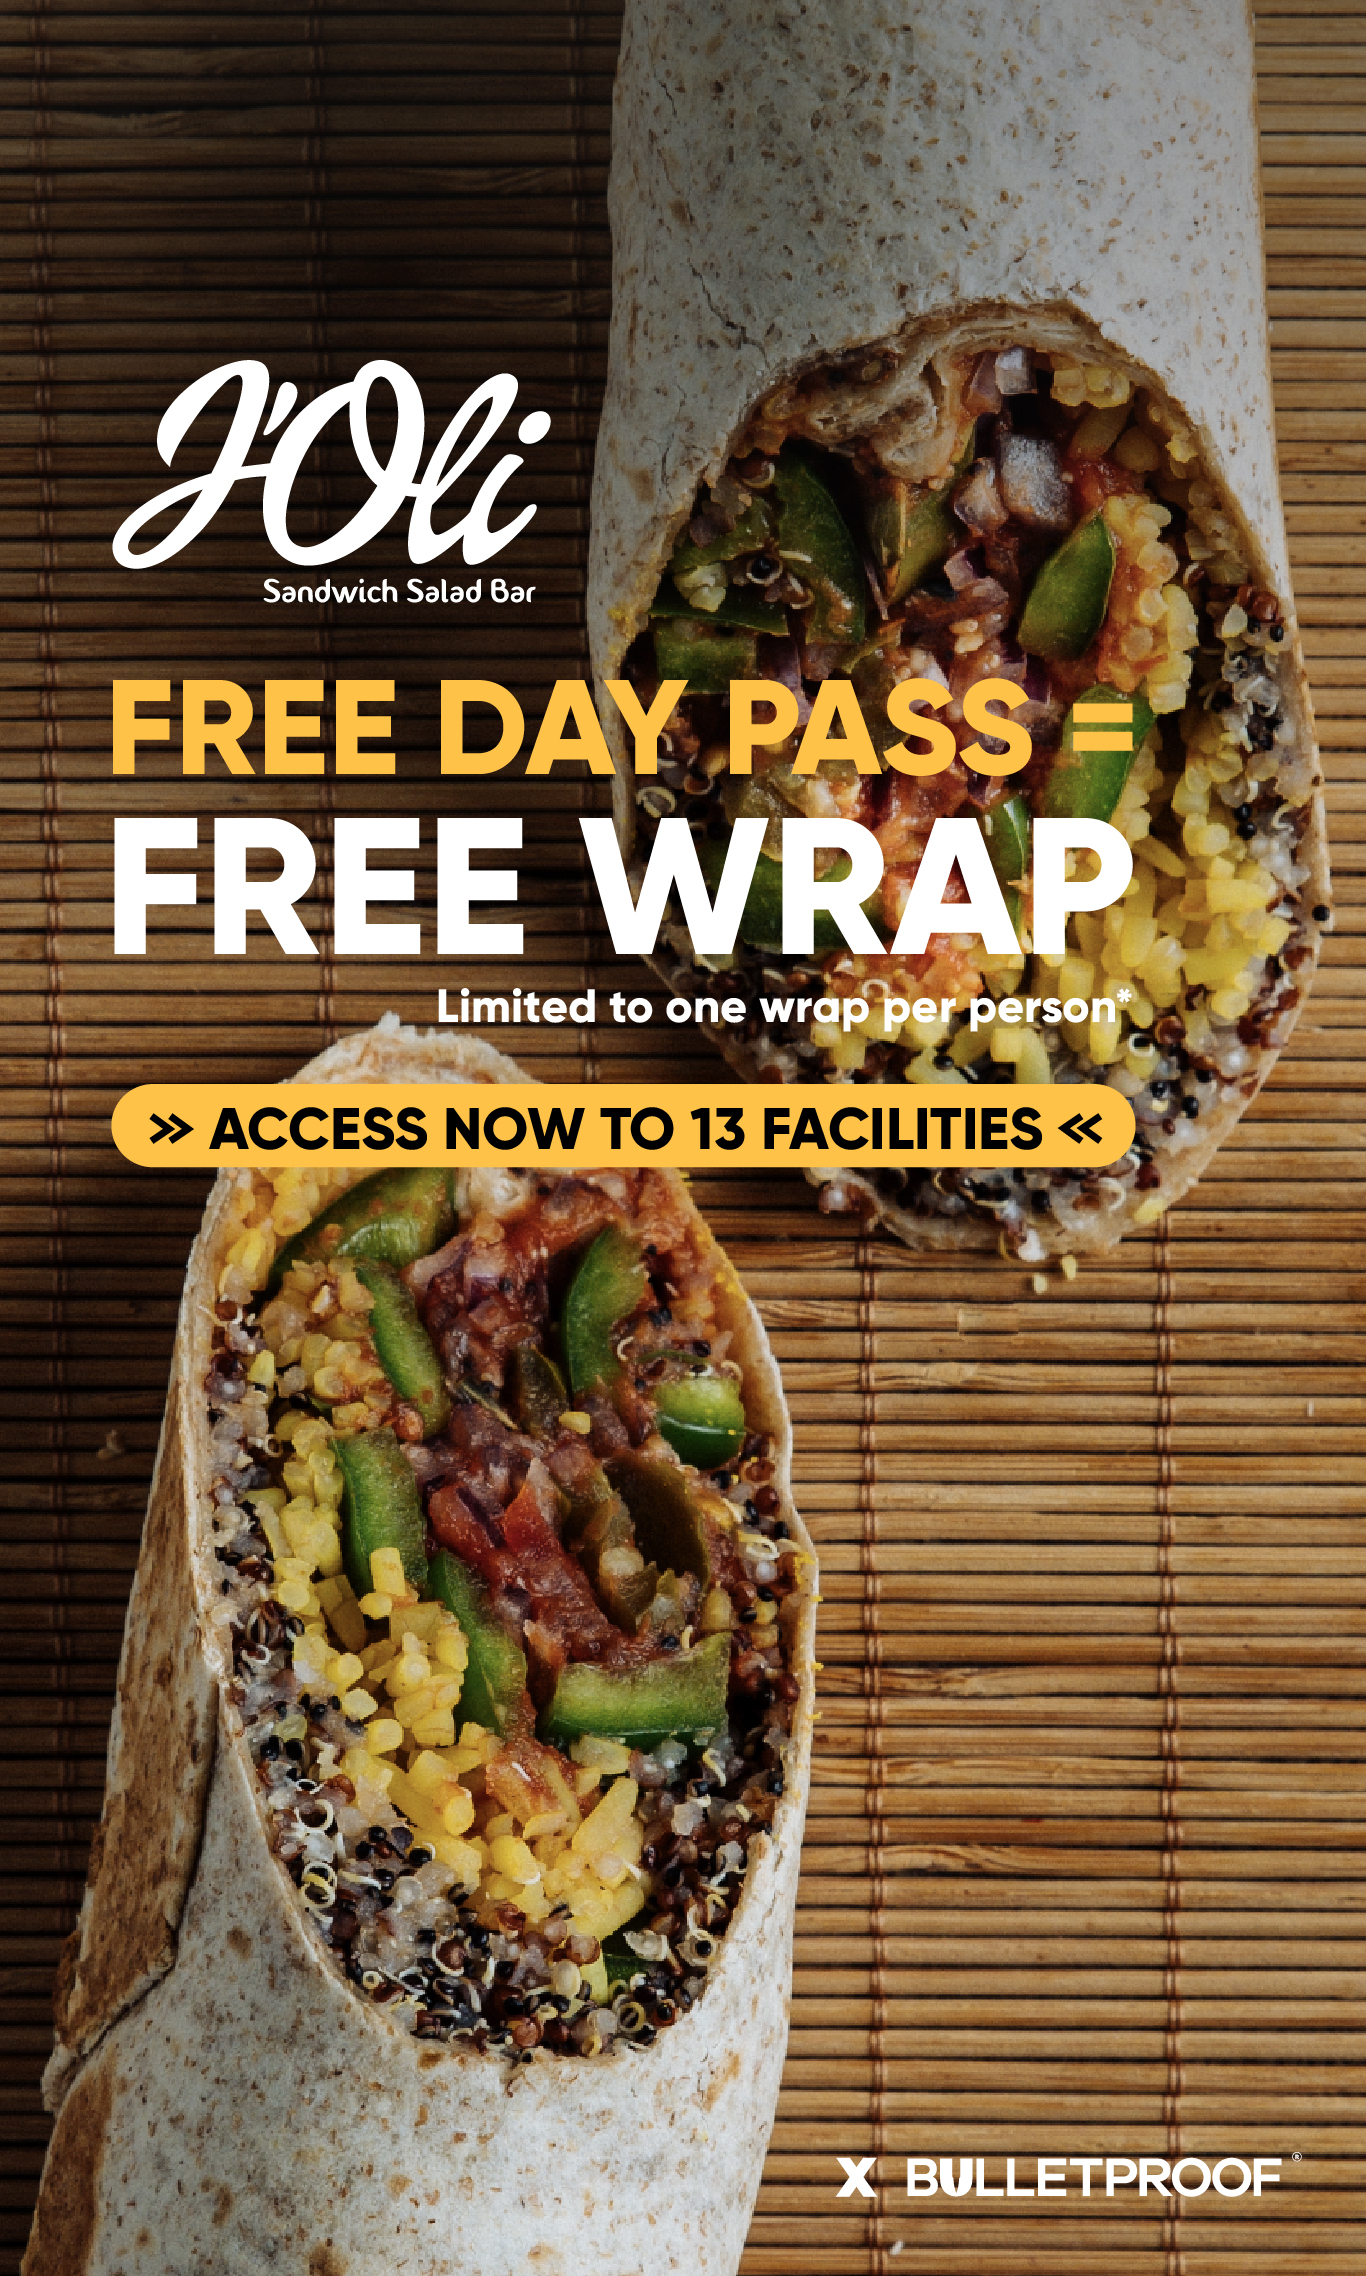 Visit a facility via our Free Day Passes & get a FREE Wrap from J'Oli.